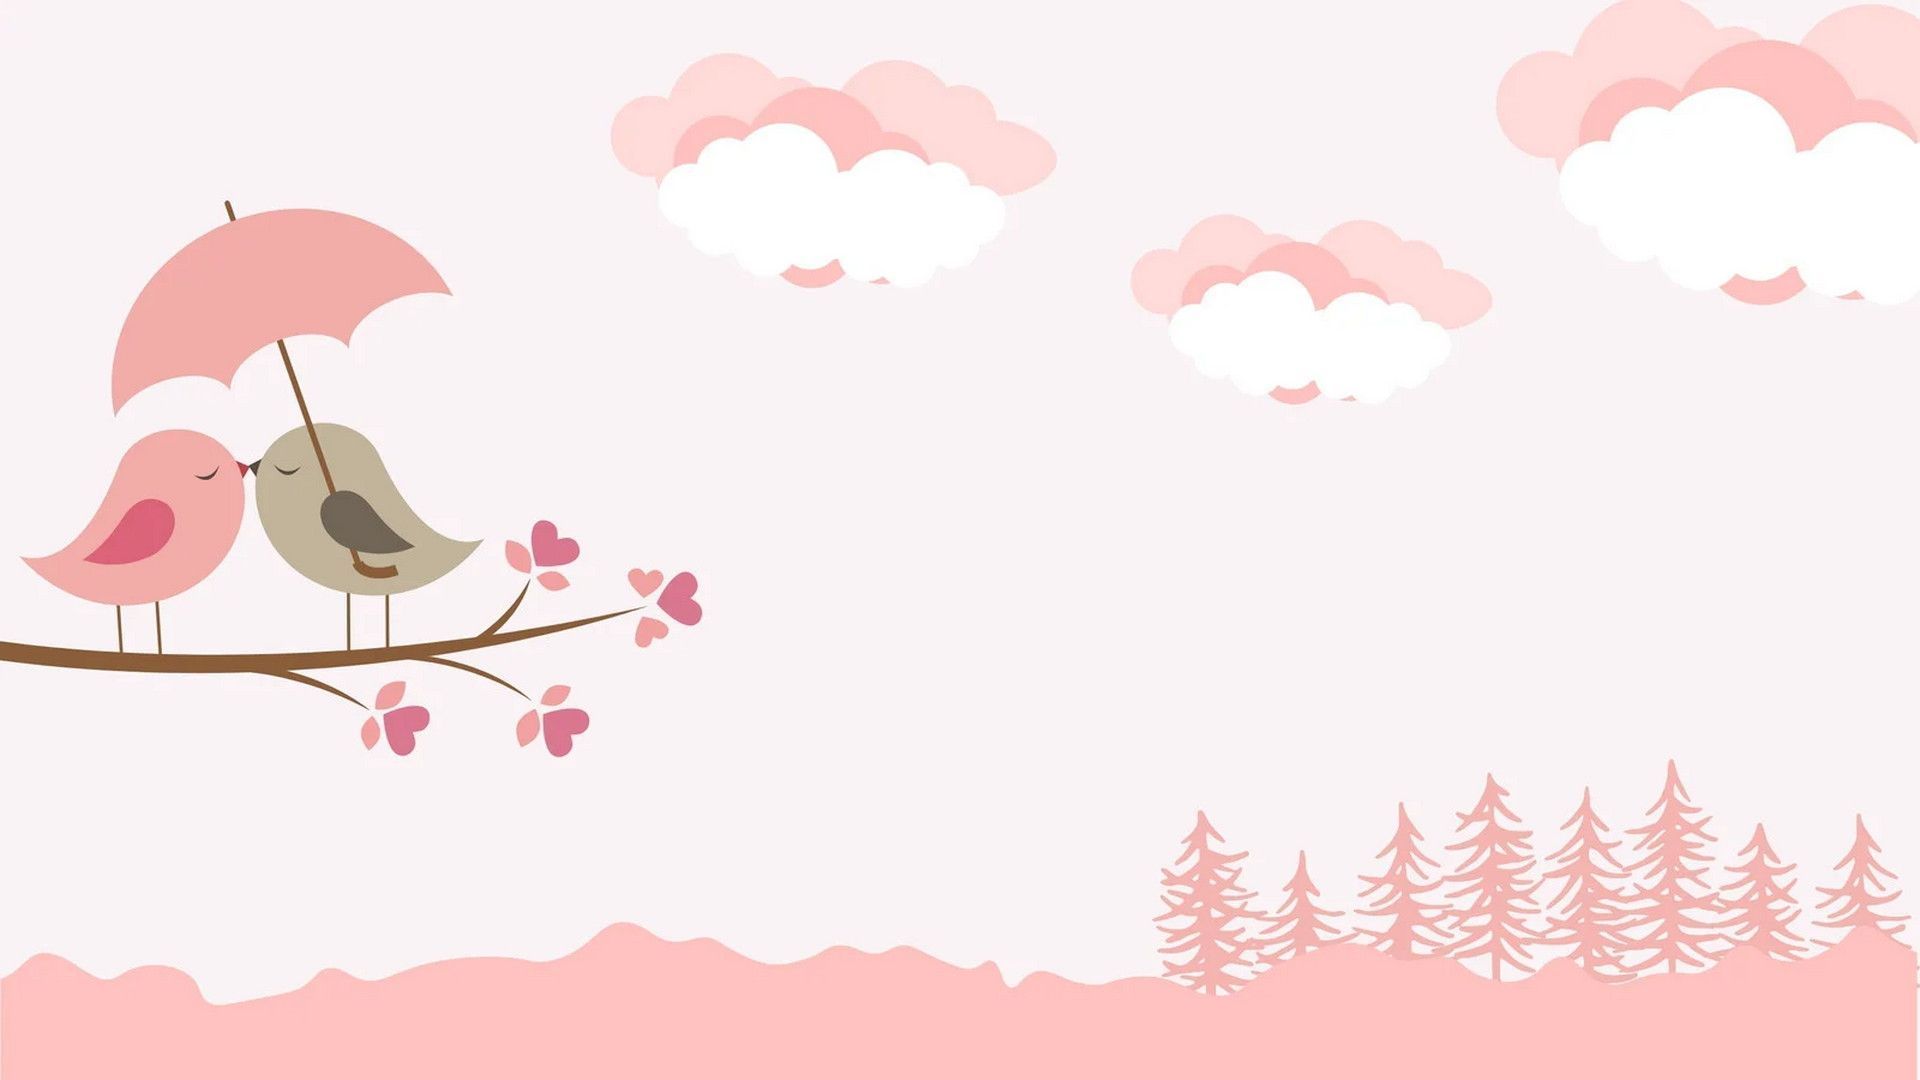 Two birds sitting on a tree branch with pink umbrella and pink hearts. - MacBook, 1920x1080, cute